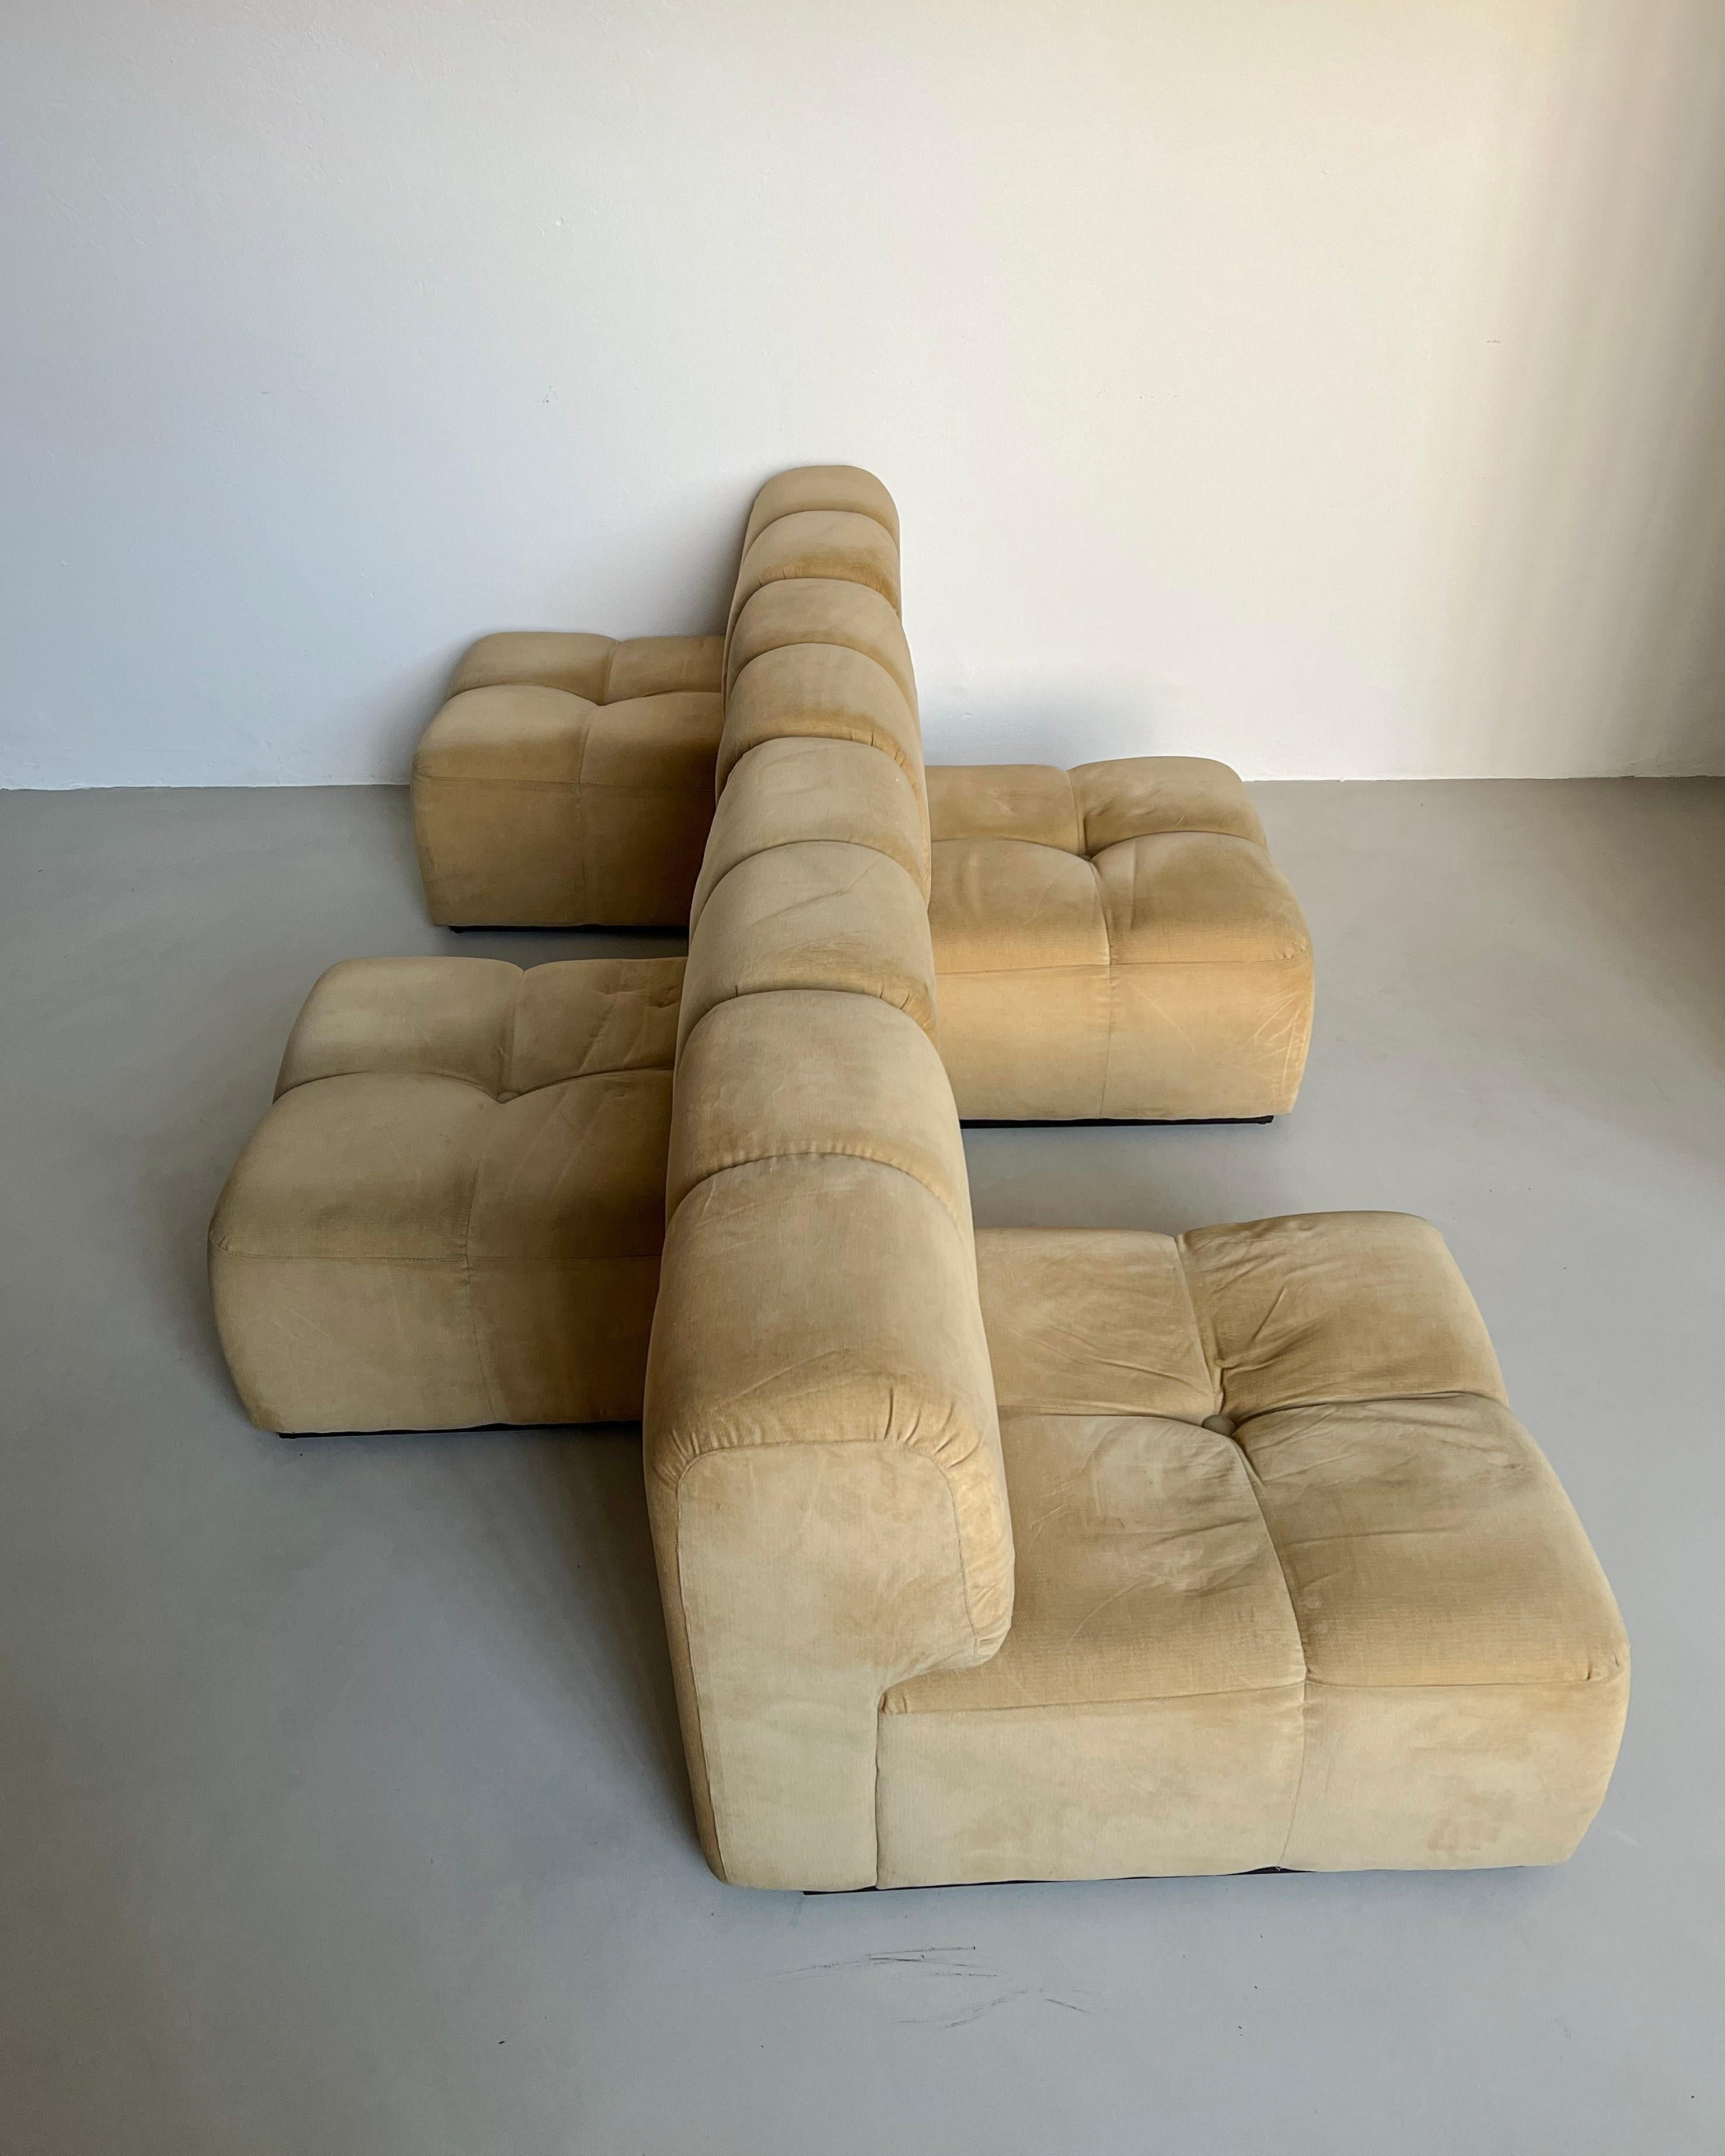 Offered for sale is a set of four modular lounge chairs, which can be placed side by side to build a four seater sofa and also placed in several different configurations. Made in Italy, they can be dated to the second half of the 1970s: the golden